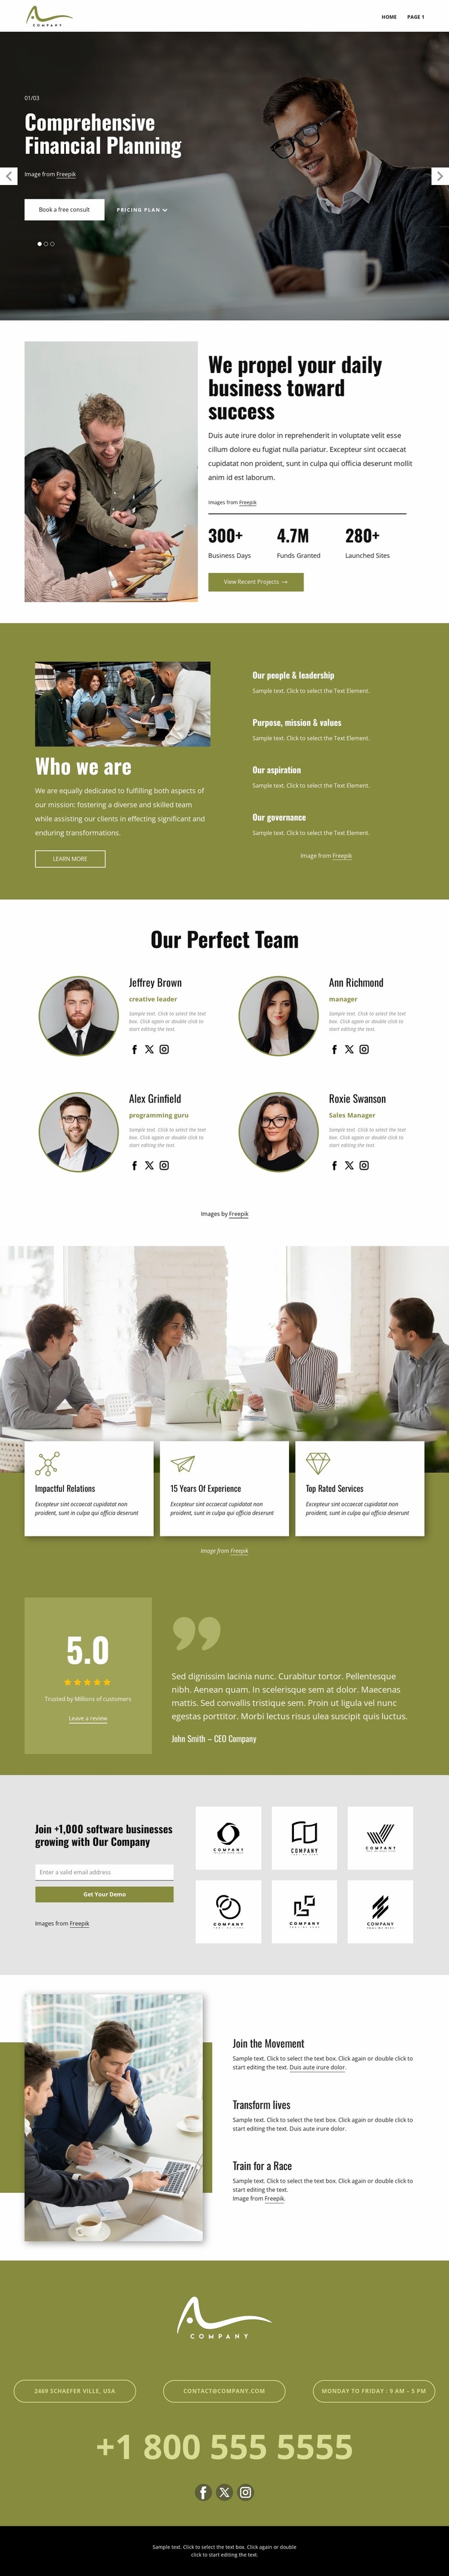 Strategic consulting solutions Website Mockup